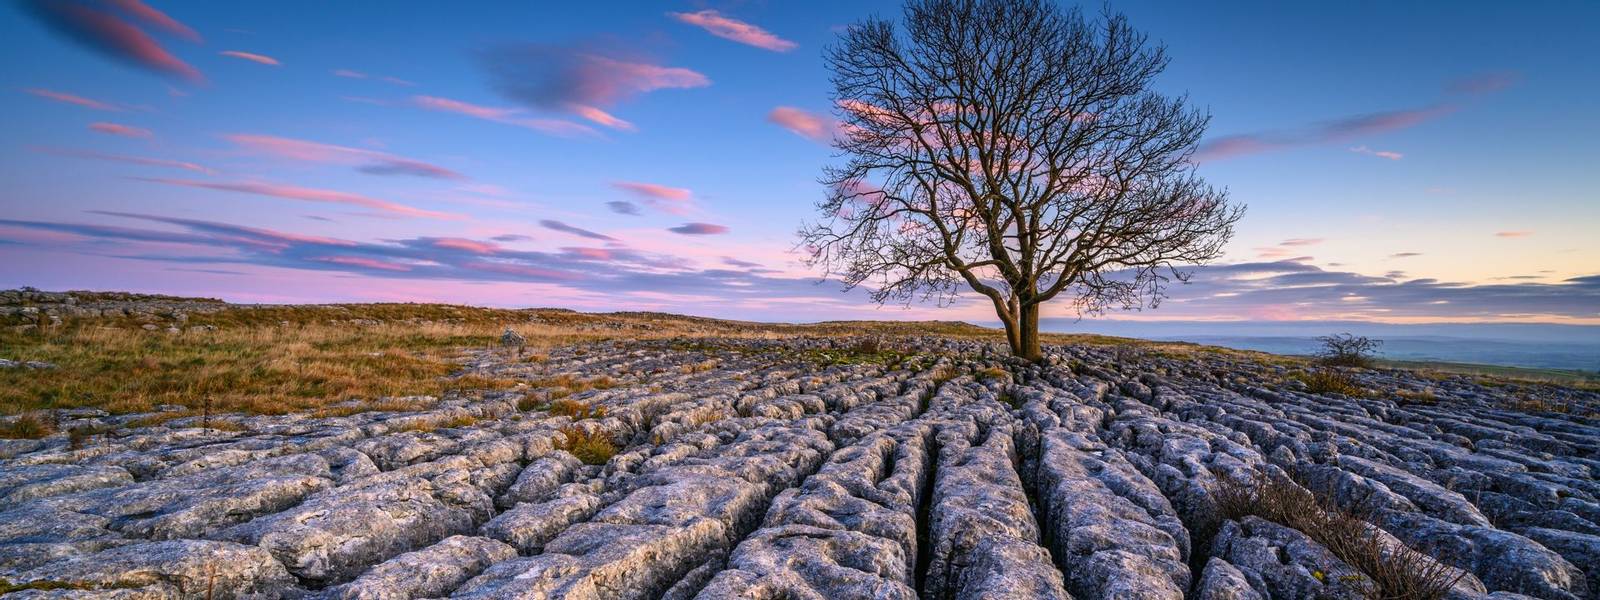 Above Malham Village in the Yorkshire Dales there is an area of Limestone Pavement known as Malham Lings